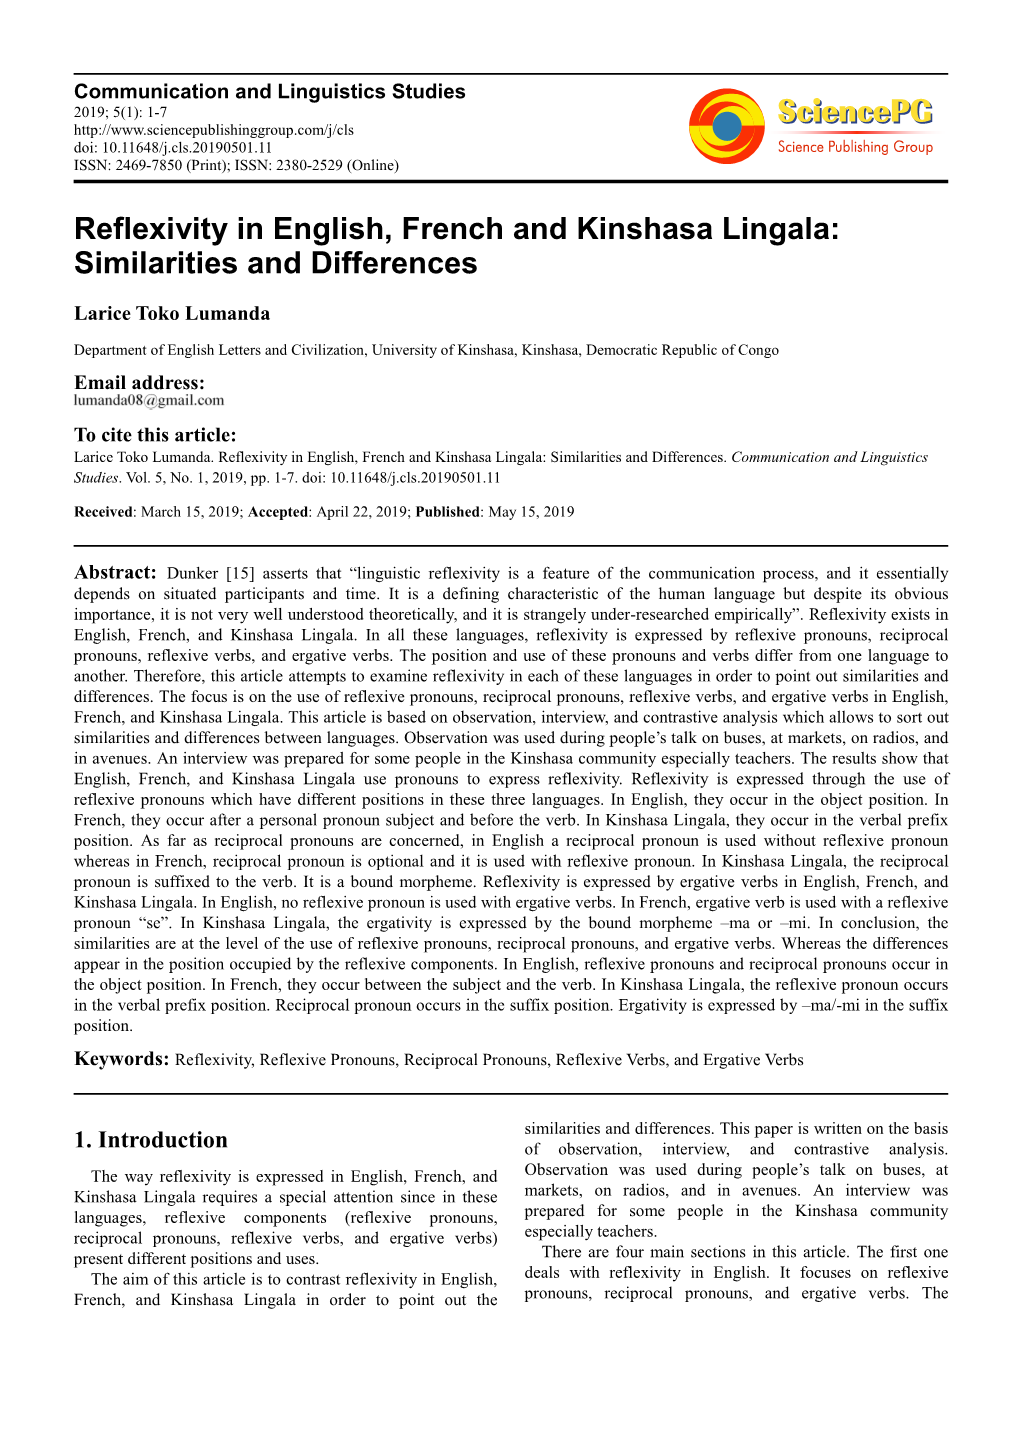 Reflexivity in English, French and Kinshasa Lingala: Similarities and Differences